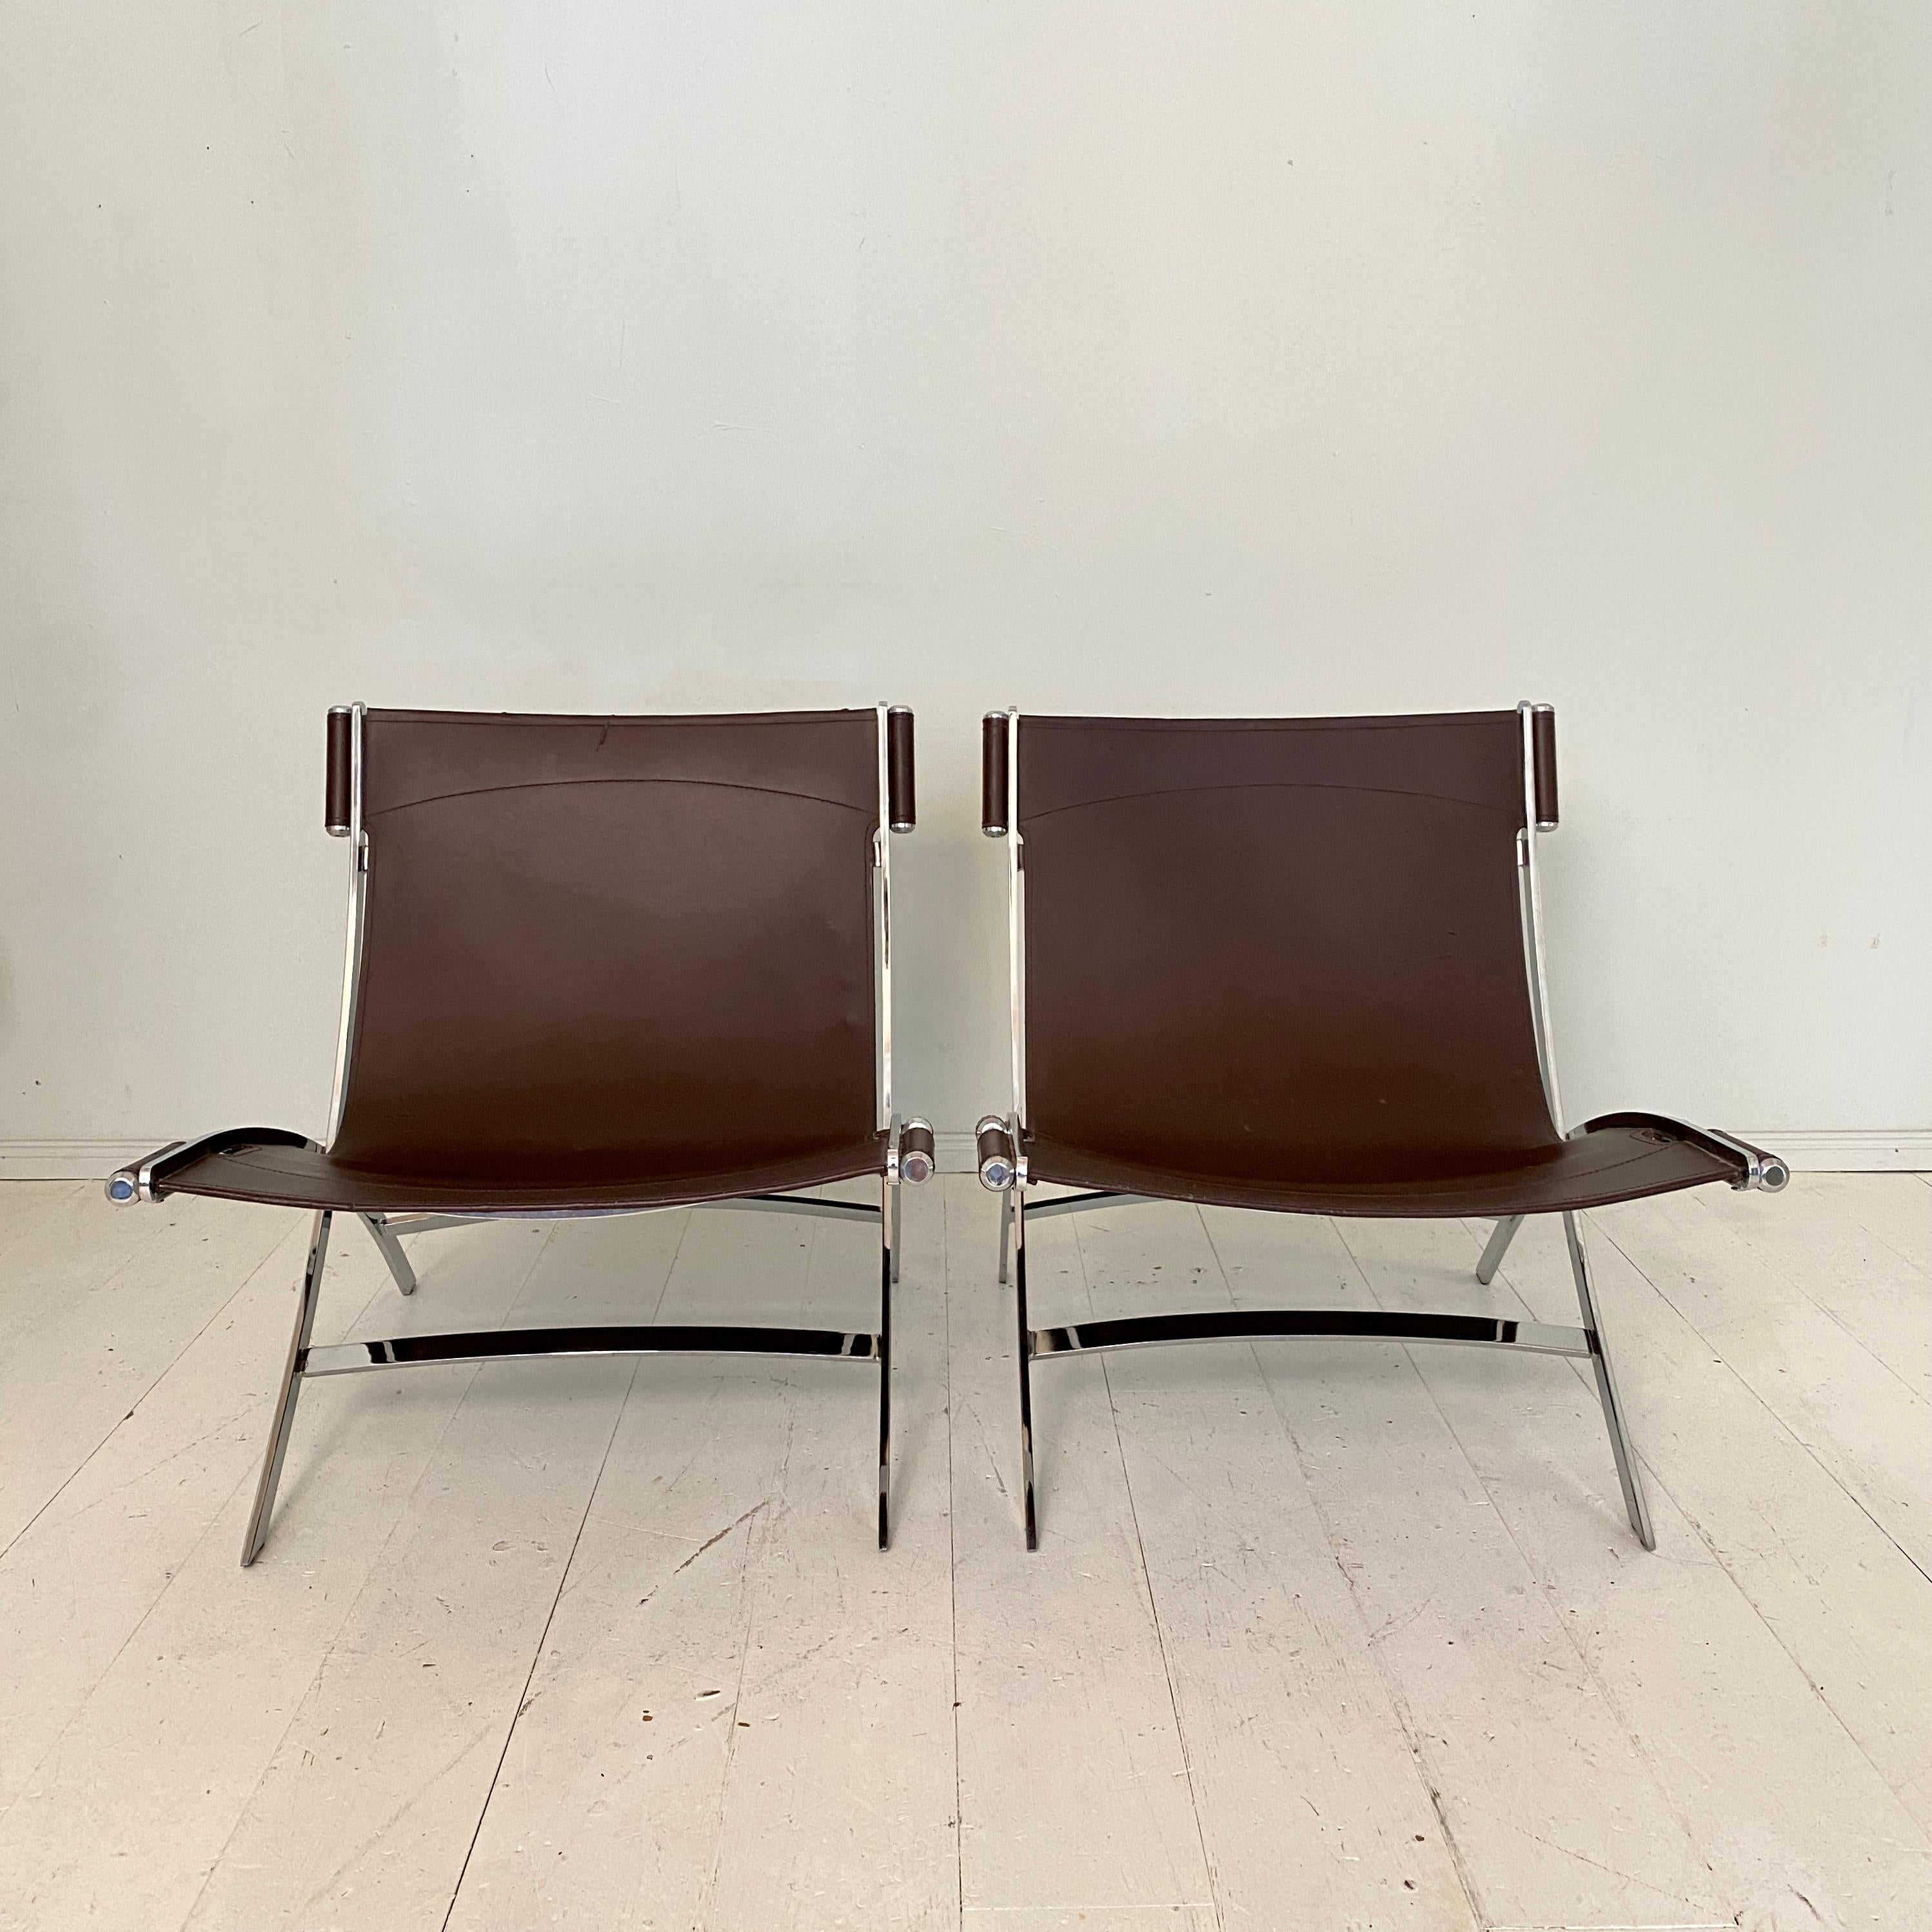 Italian Pair of Lounge Chairs by Antonio Citterio in Chrome and Leather for Flexform